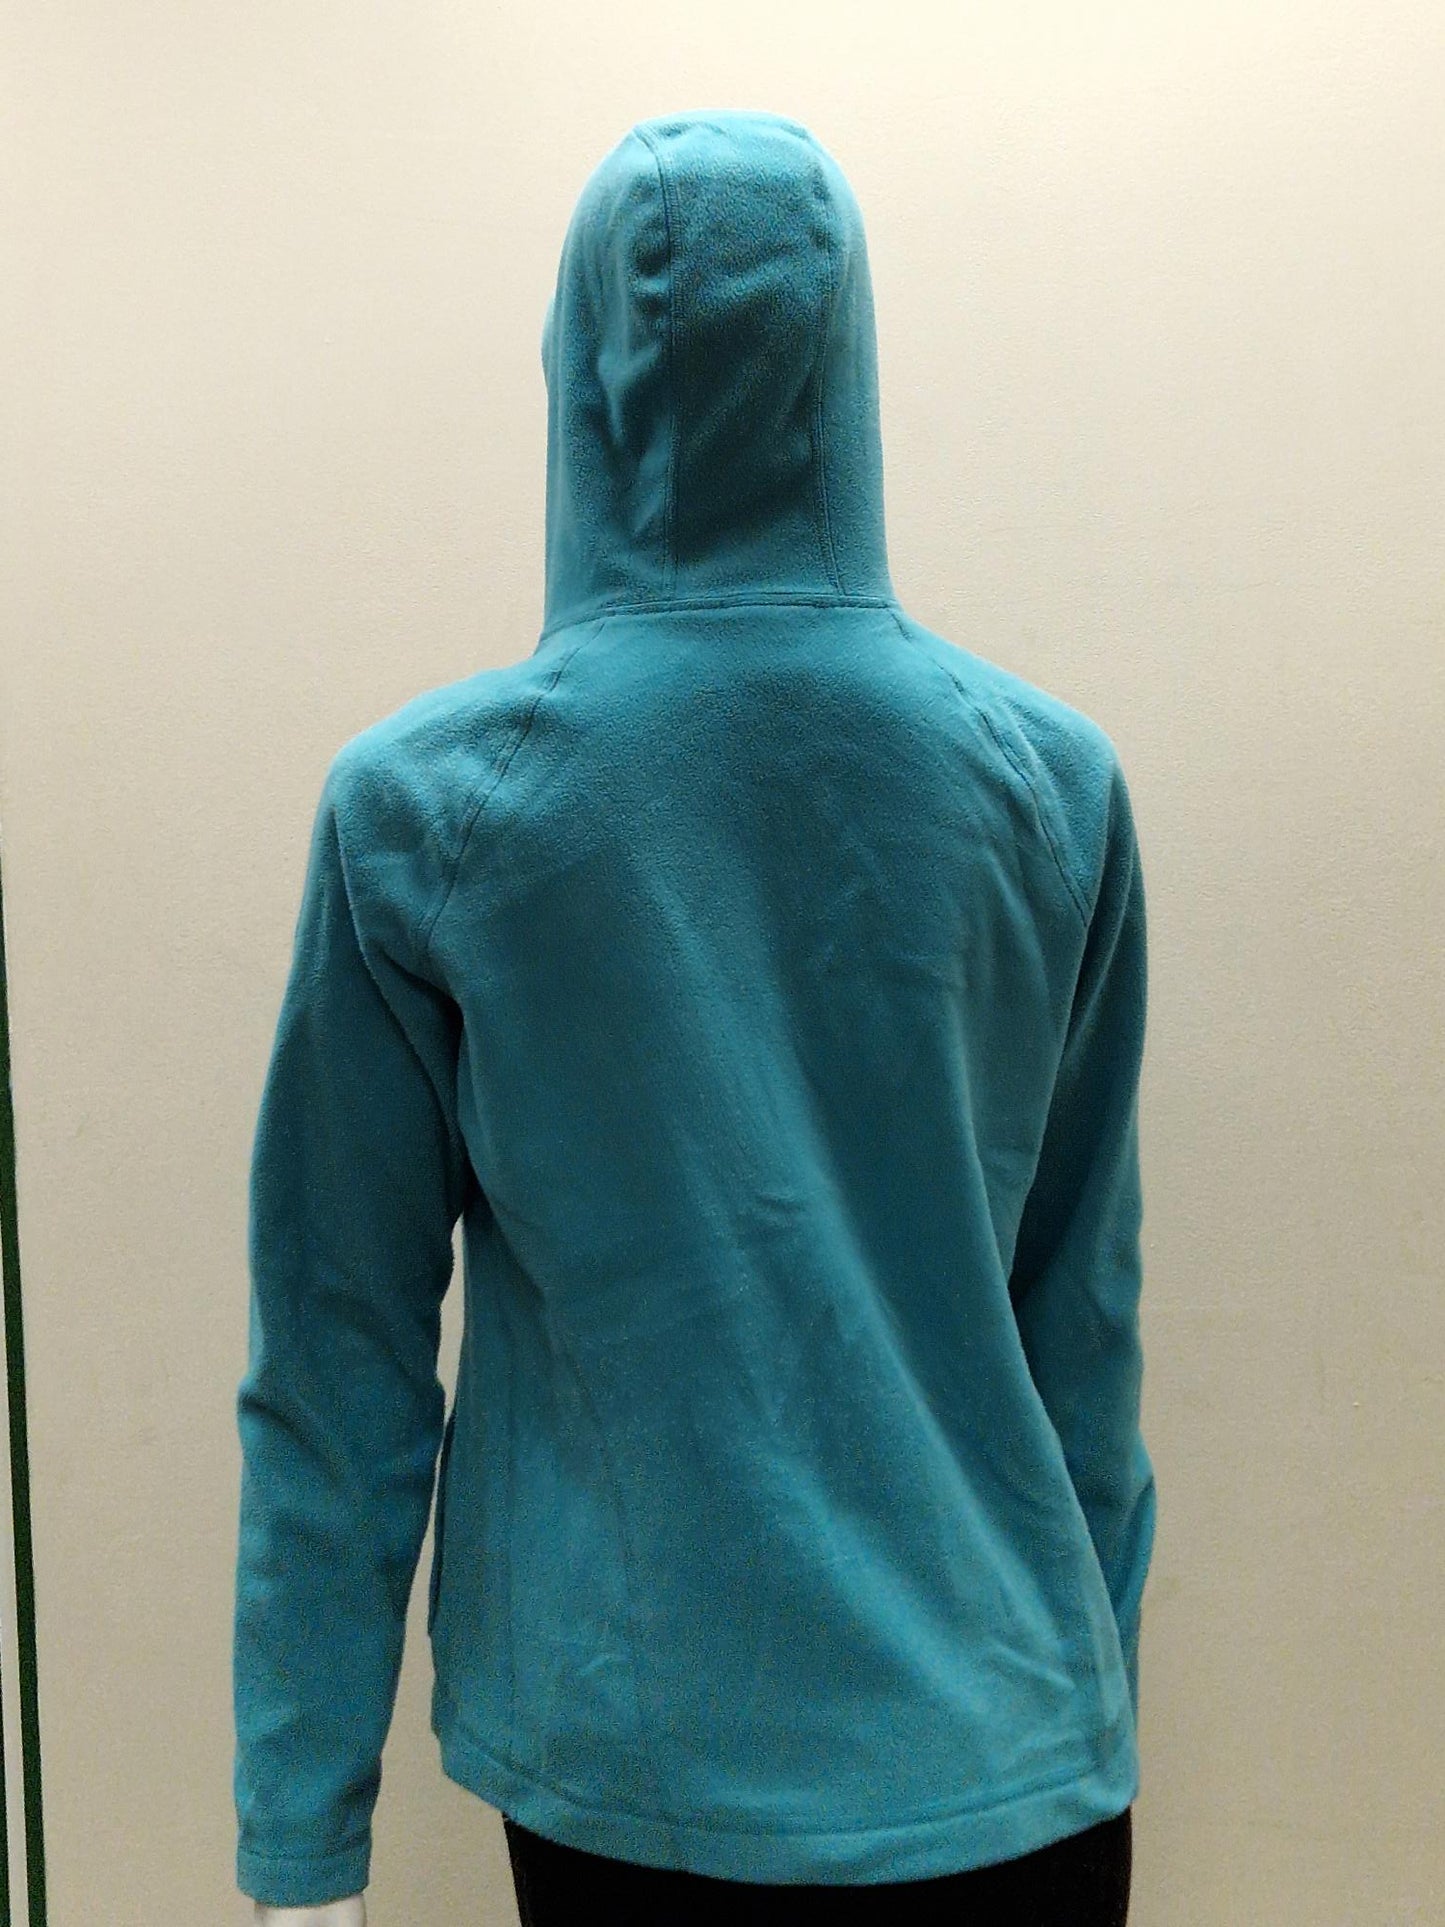 North Face Ladies fleece in Turquoise  - Size Large